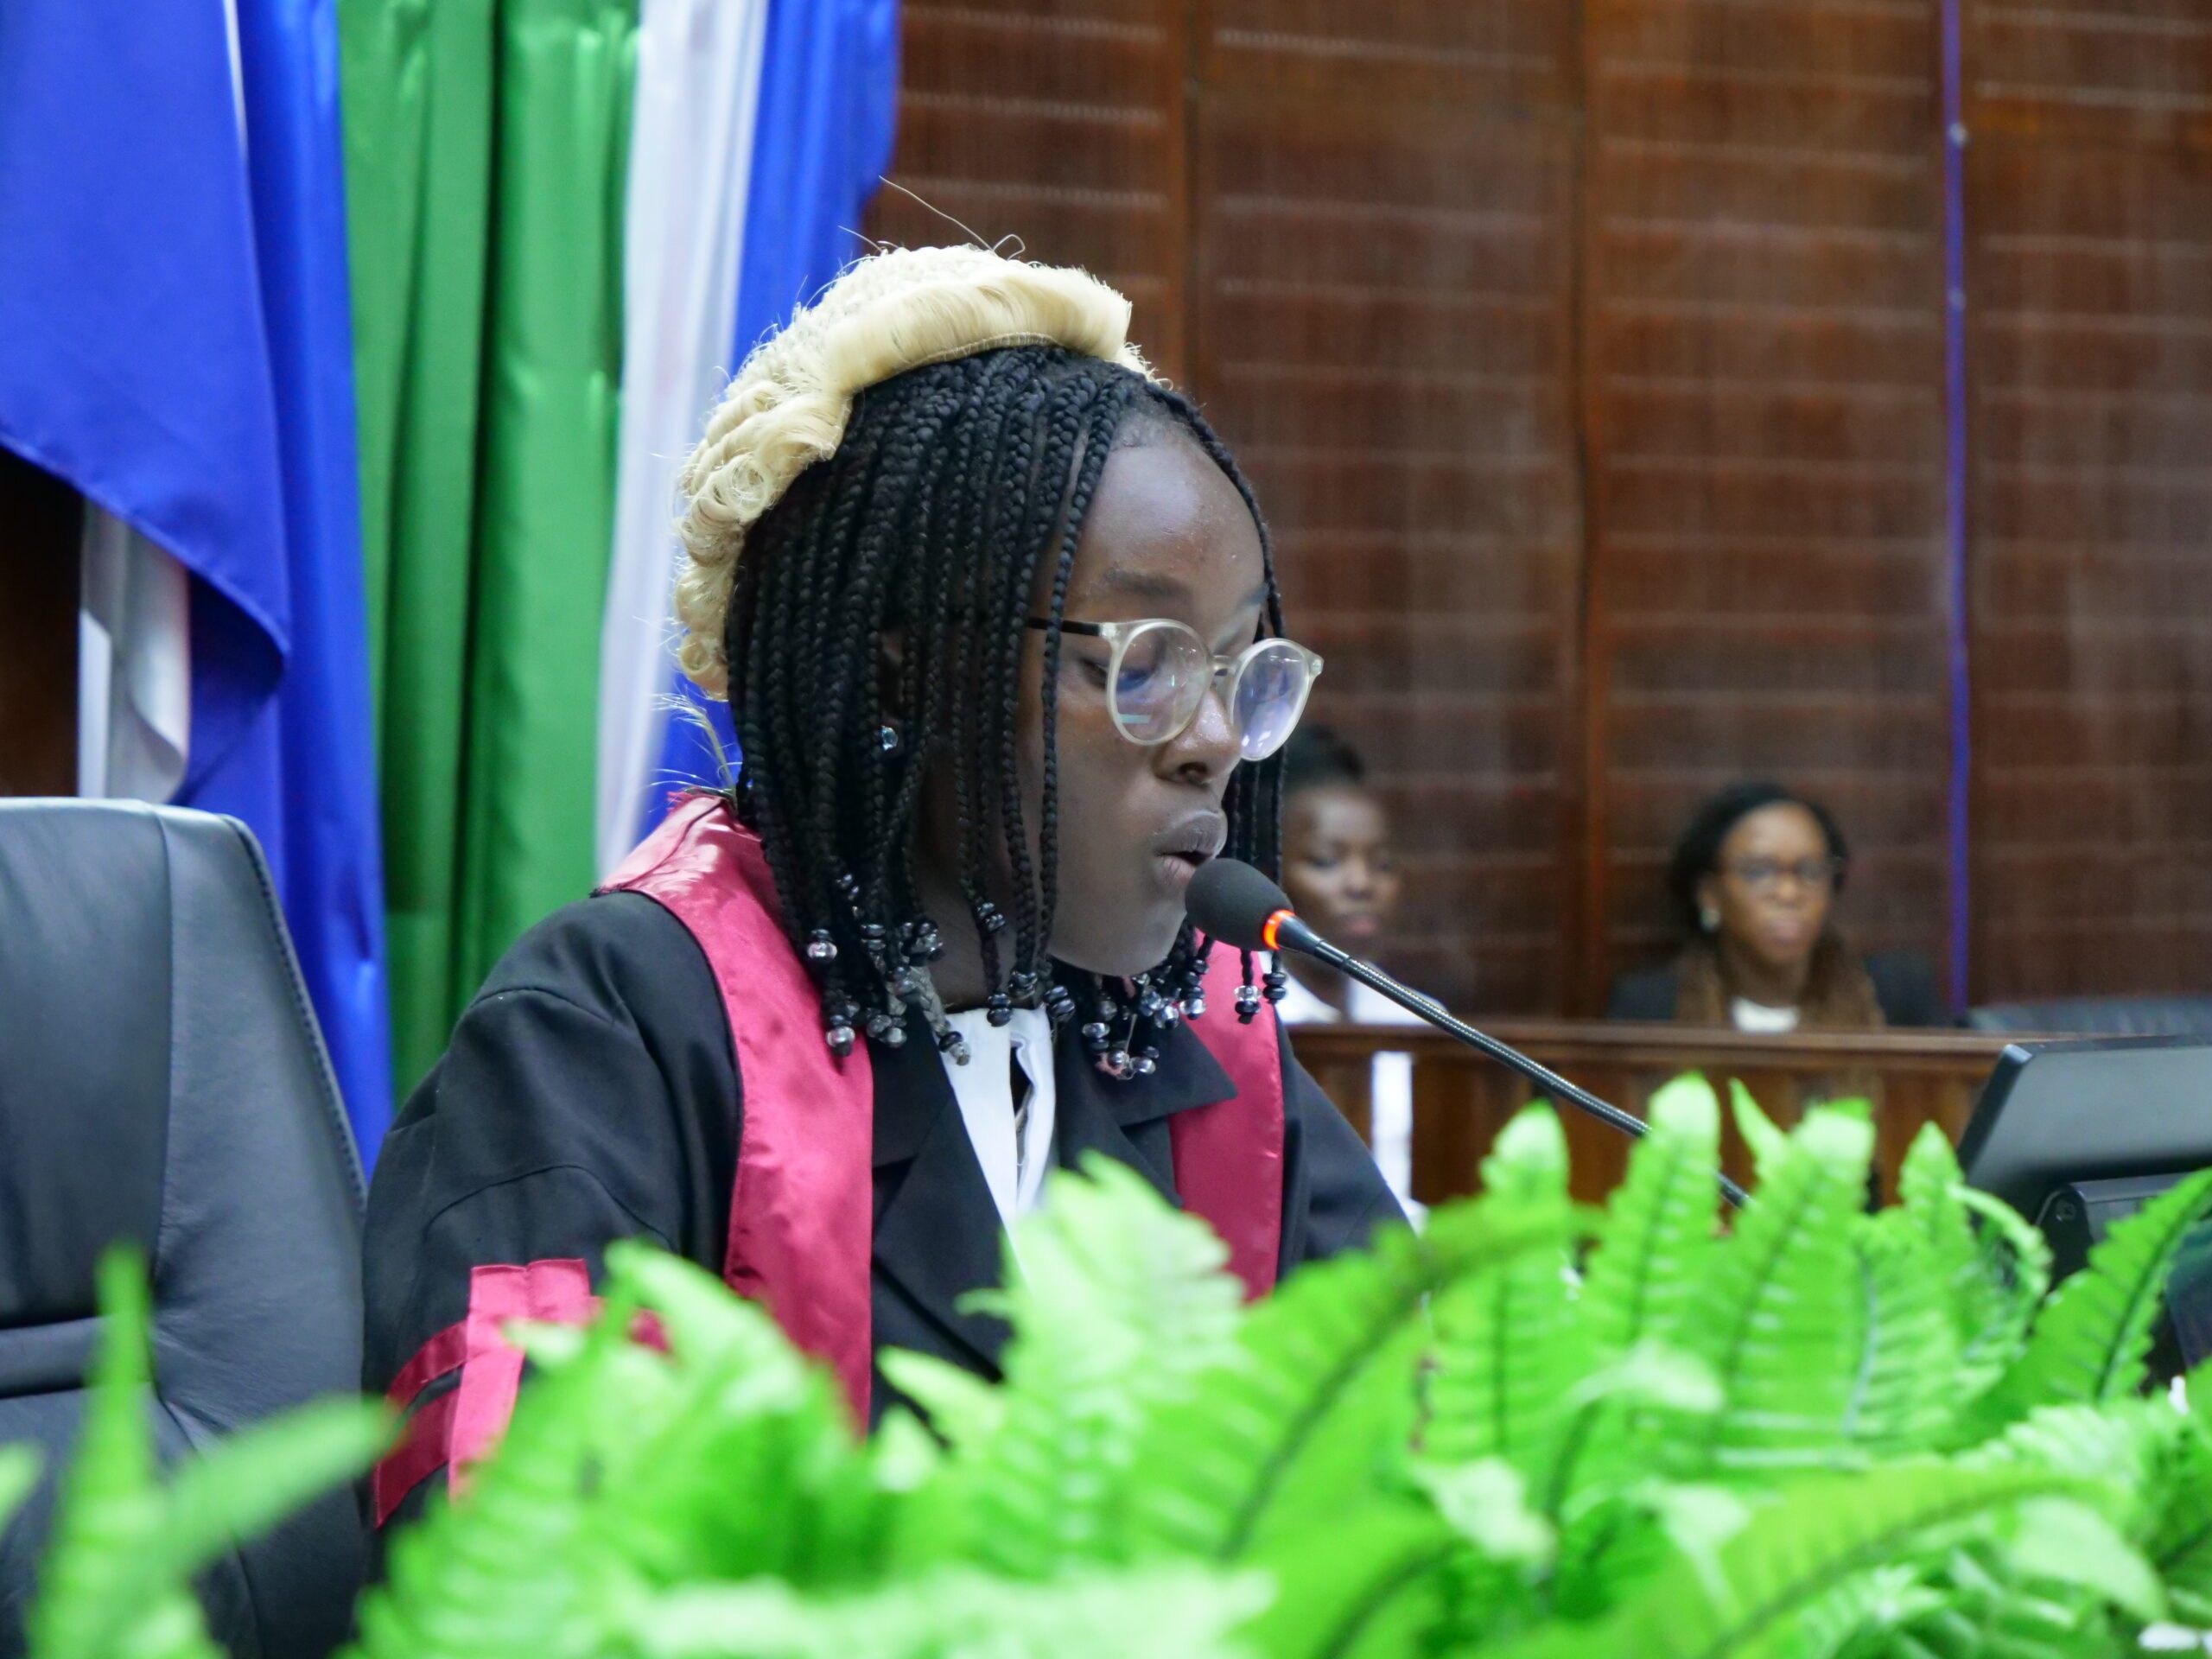 Blessing, 16, speaking at the well of Parliament during the Girls’ Takeover